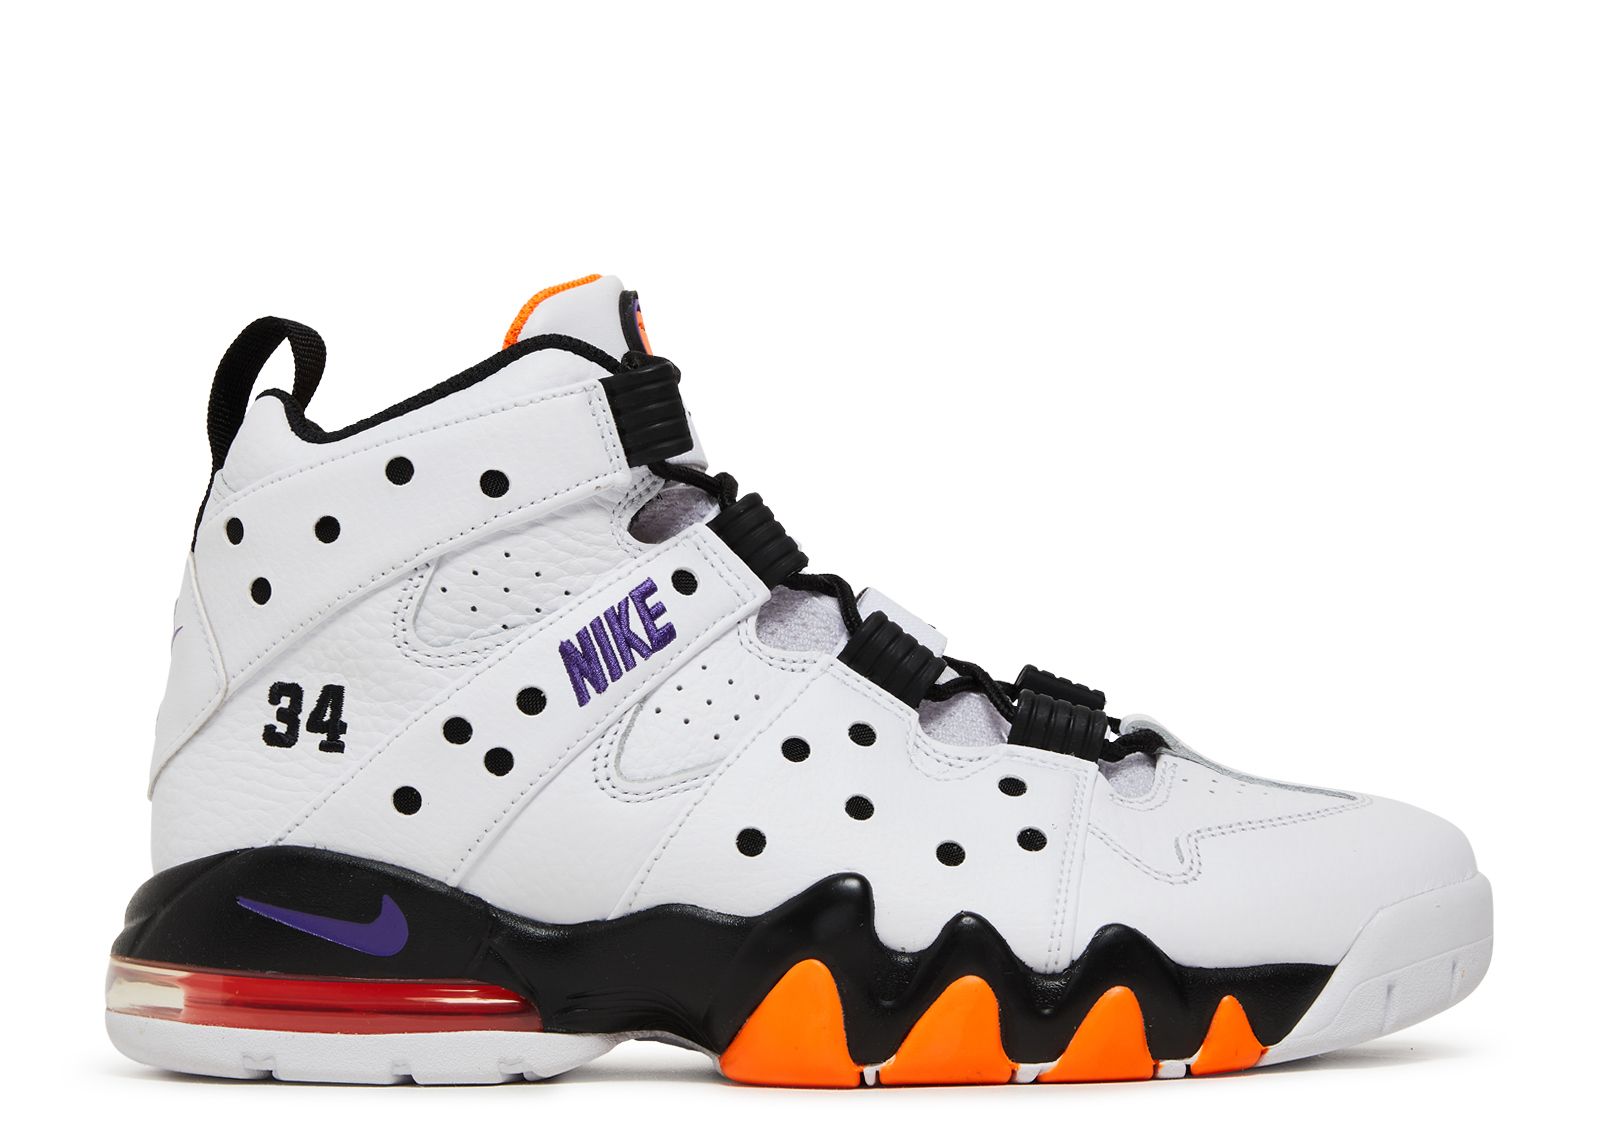 Nike Brought Back One of Charles Barkley's Most Famous Sneakers